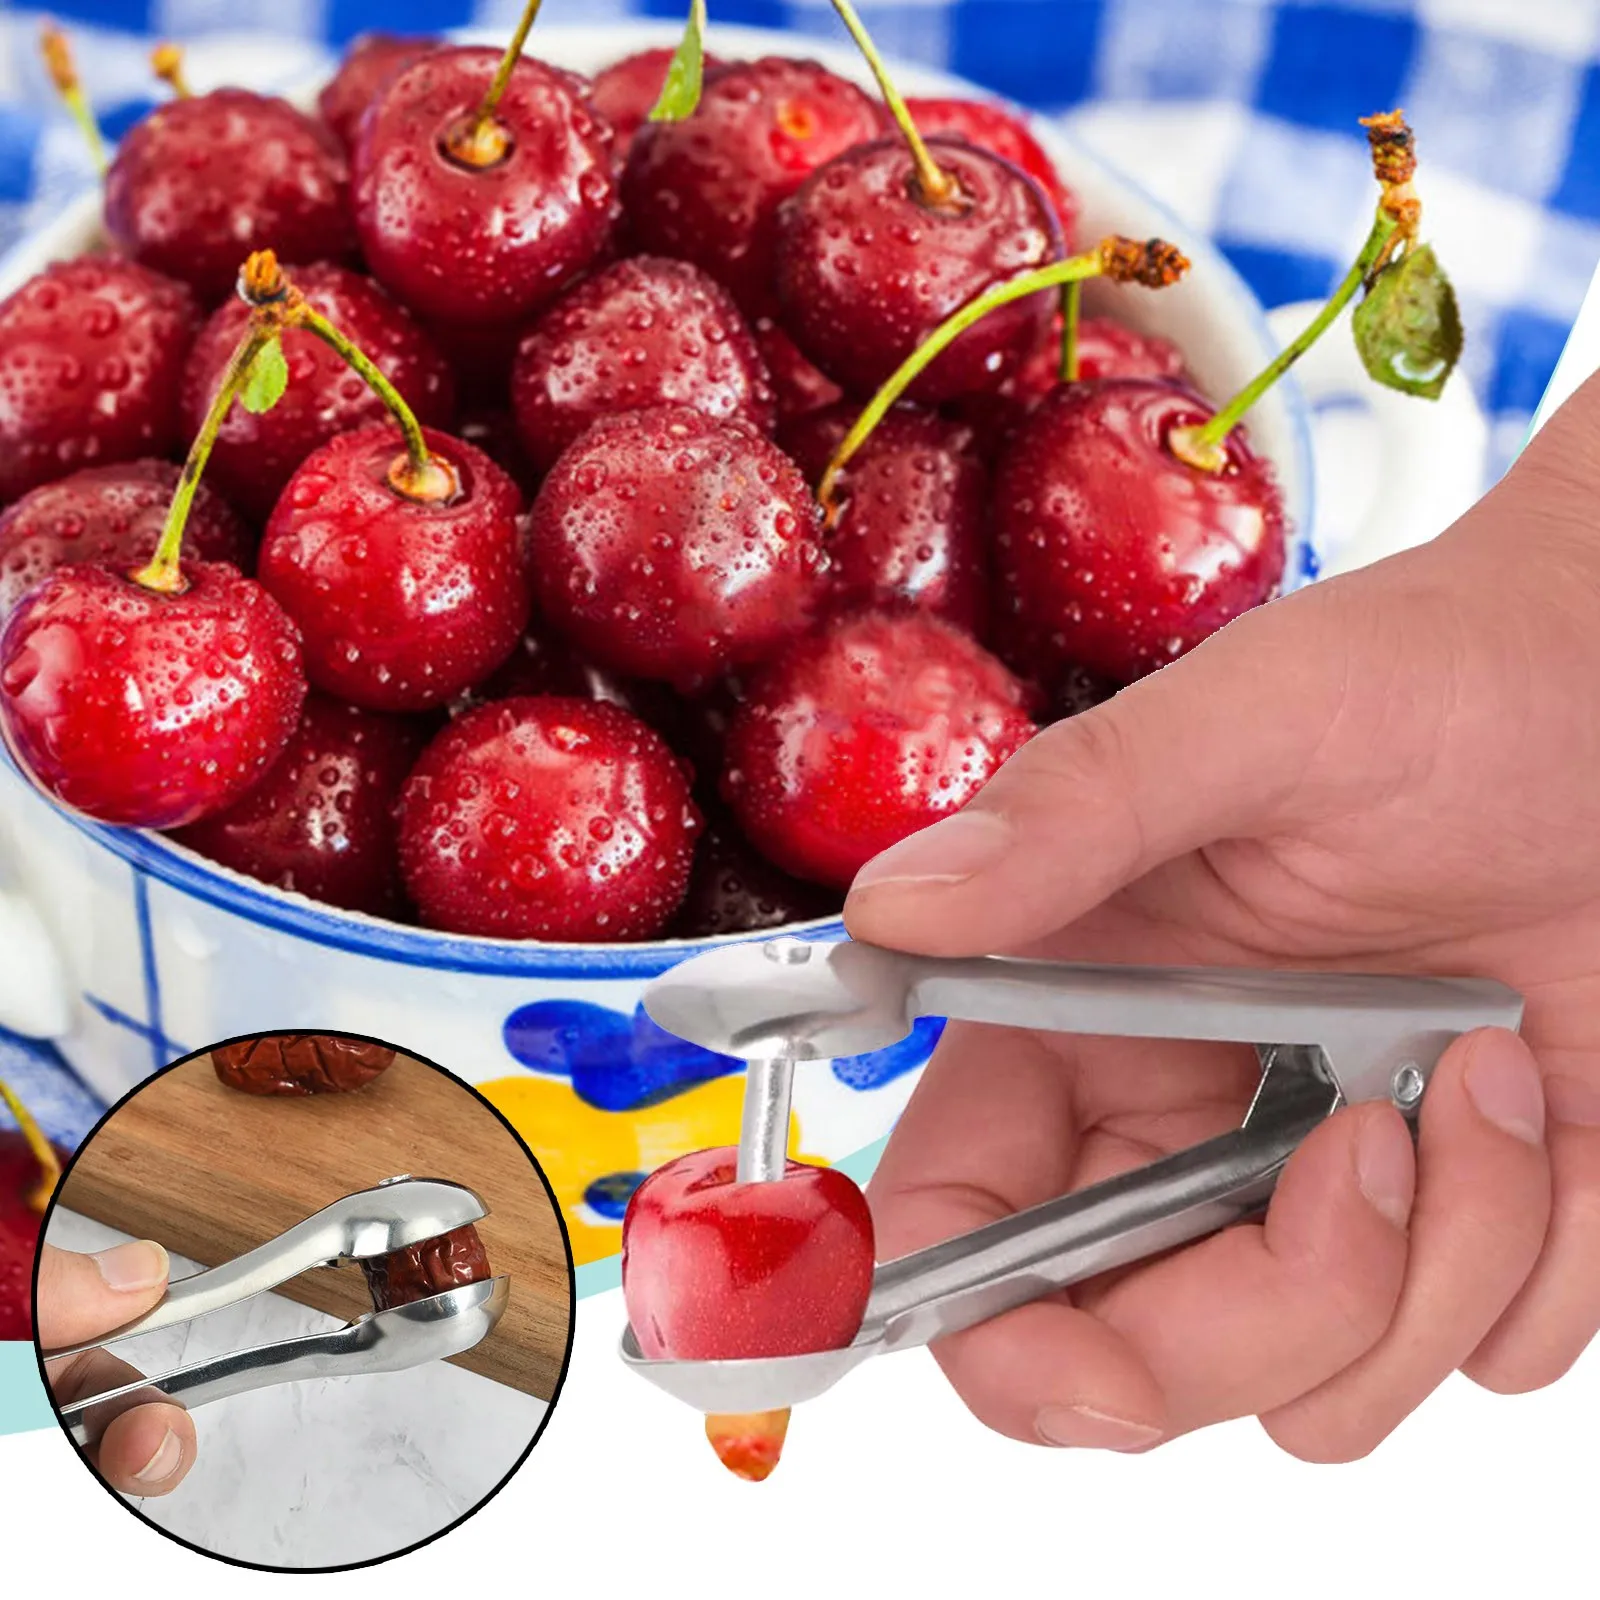 HeroNeoÃ‚Â® Aluminum Cherry Pitter Dates Olives Pit Easy Removal Core Squeeze Clamp Seeder by HeroNeoÃ‚Â® 